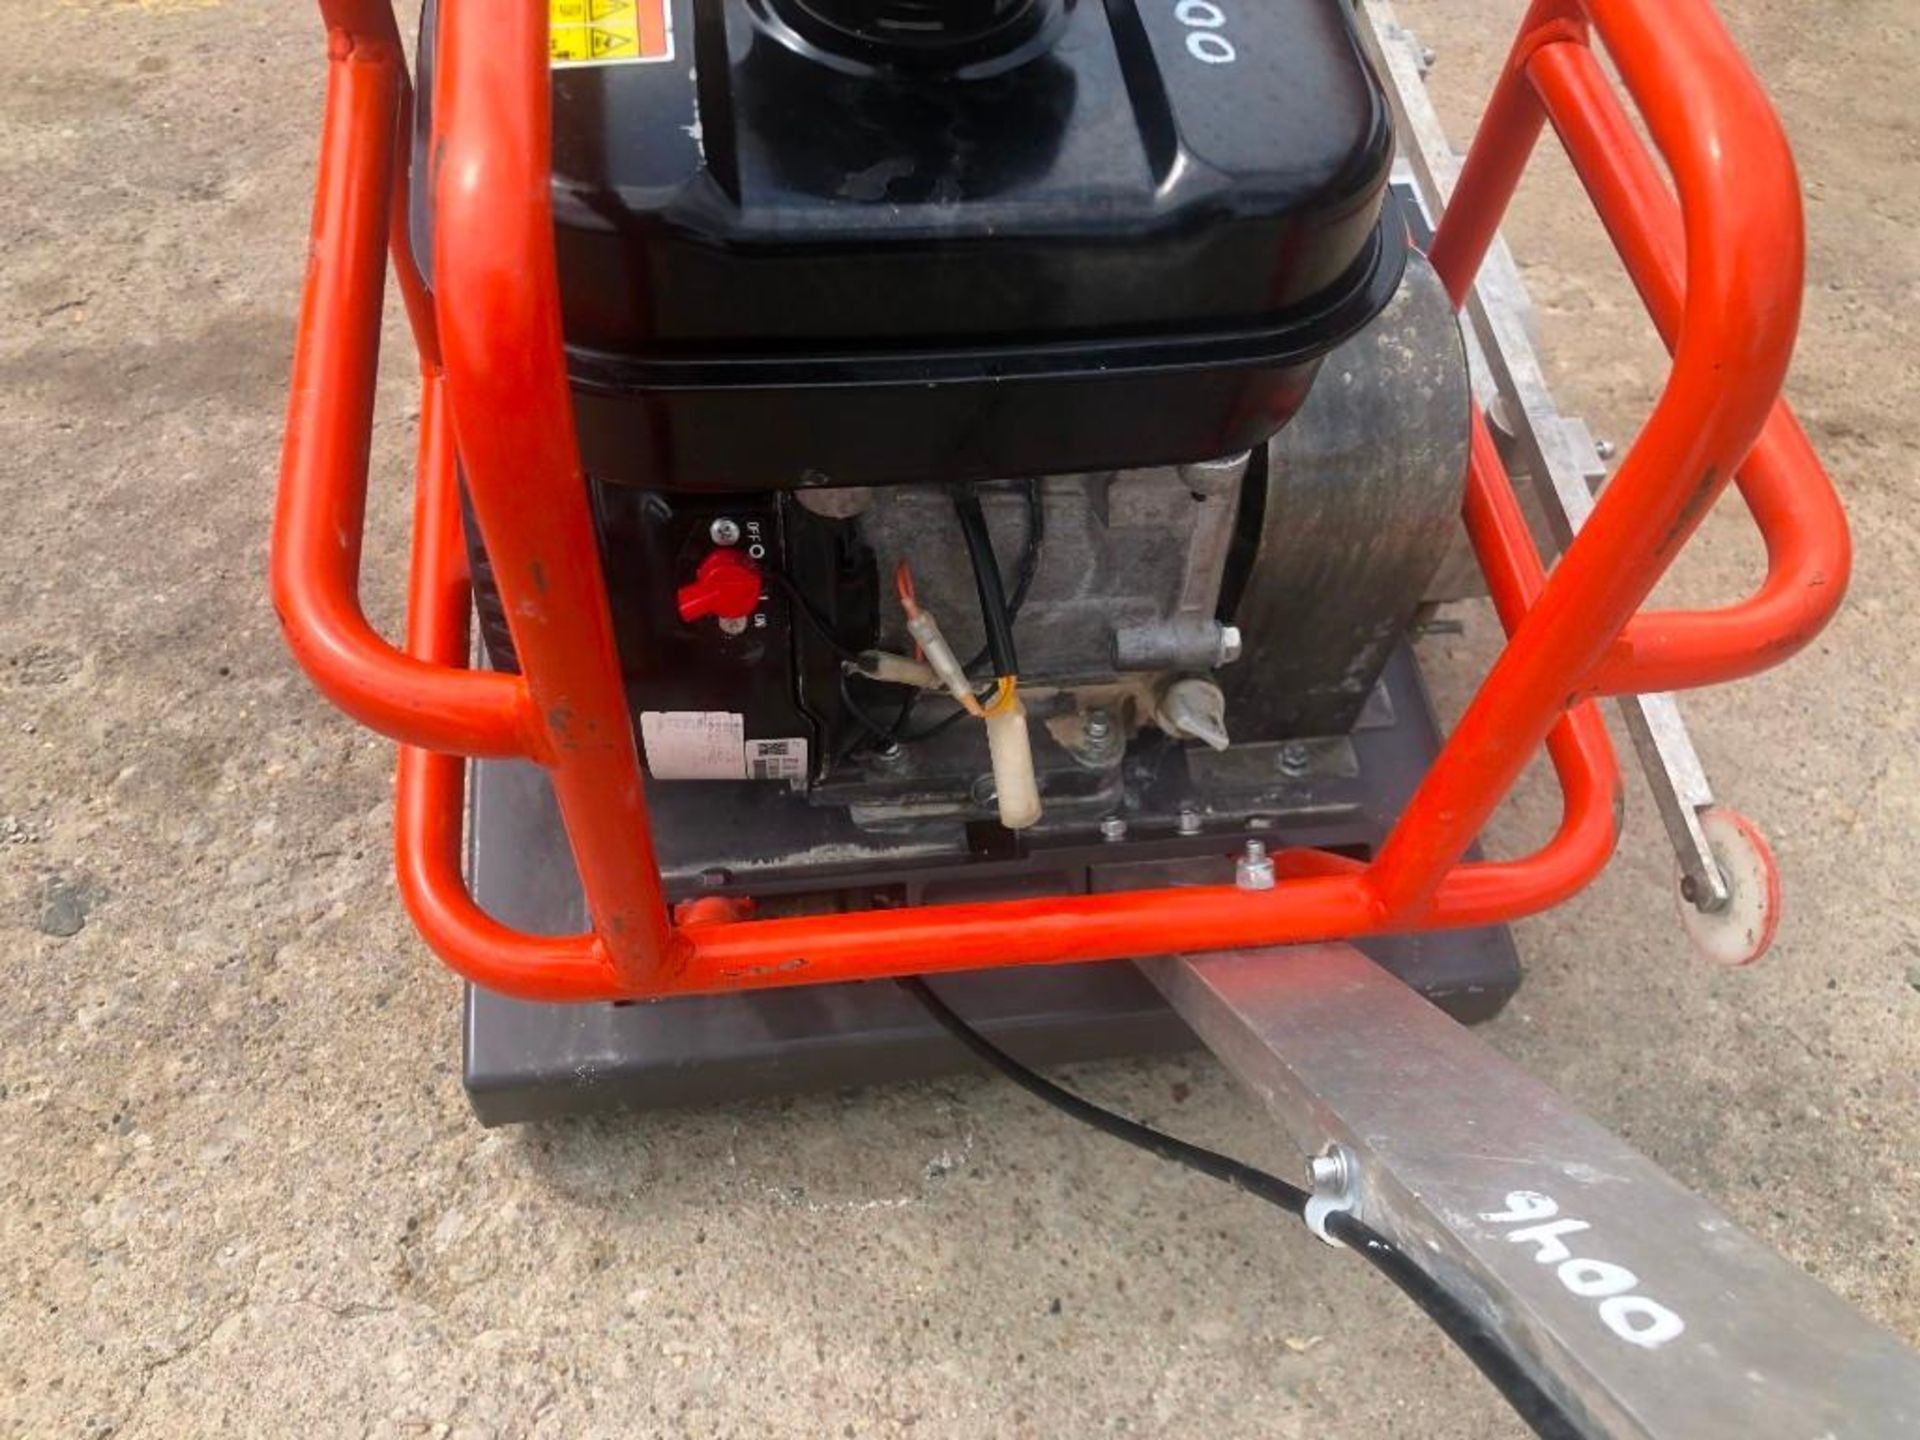 Husqvarna Soff-Cut 150 Concrete Saw, Serial #20180300046, Model Soff-Cut 150. Located at 301 E Henry - Image 4 of 5